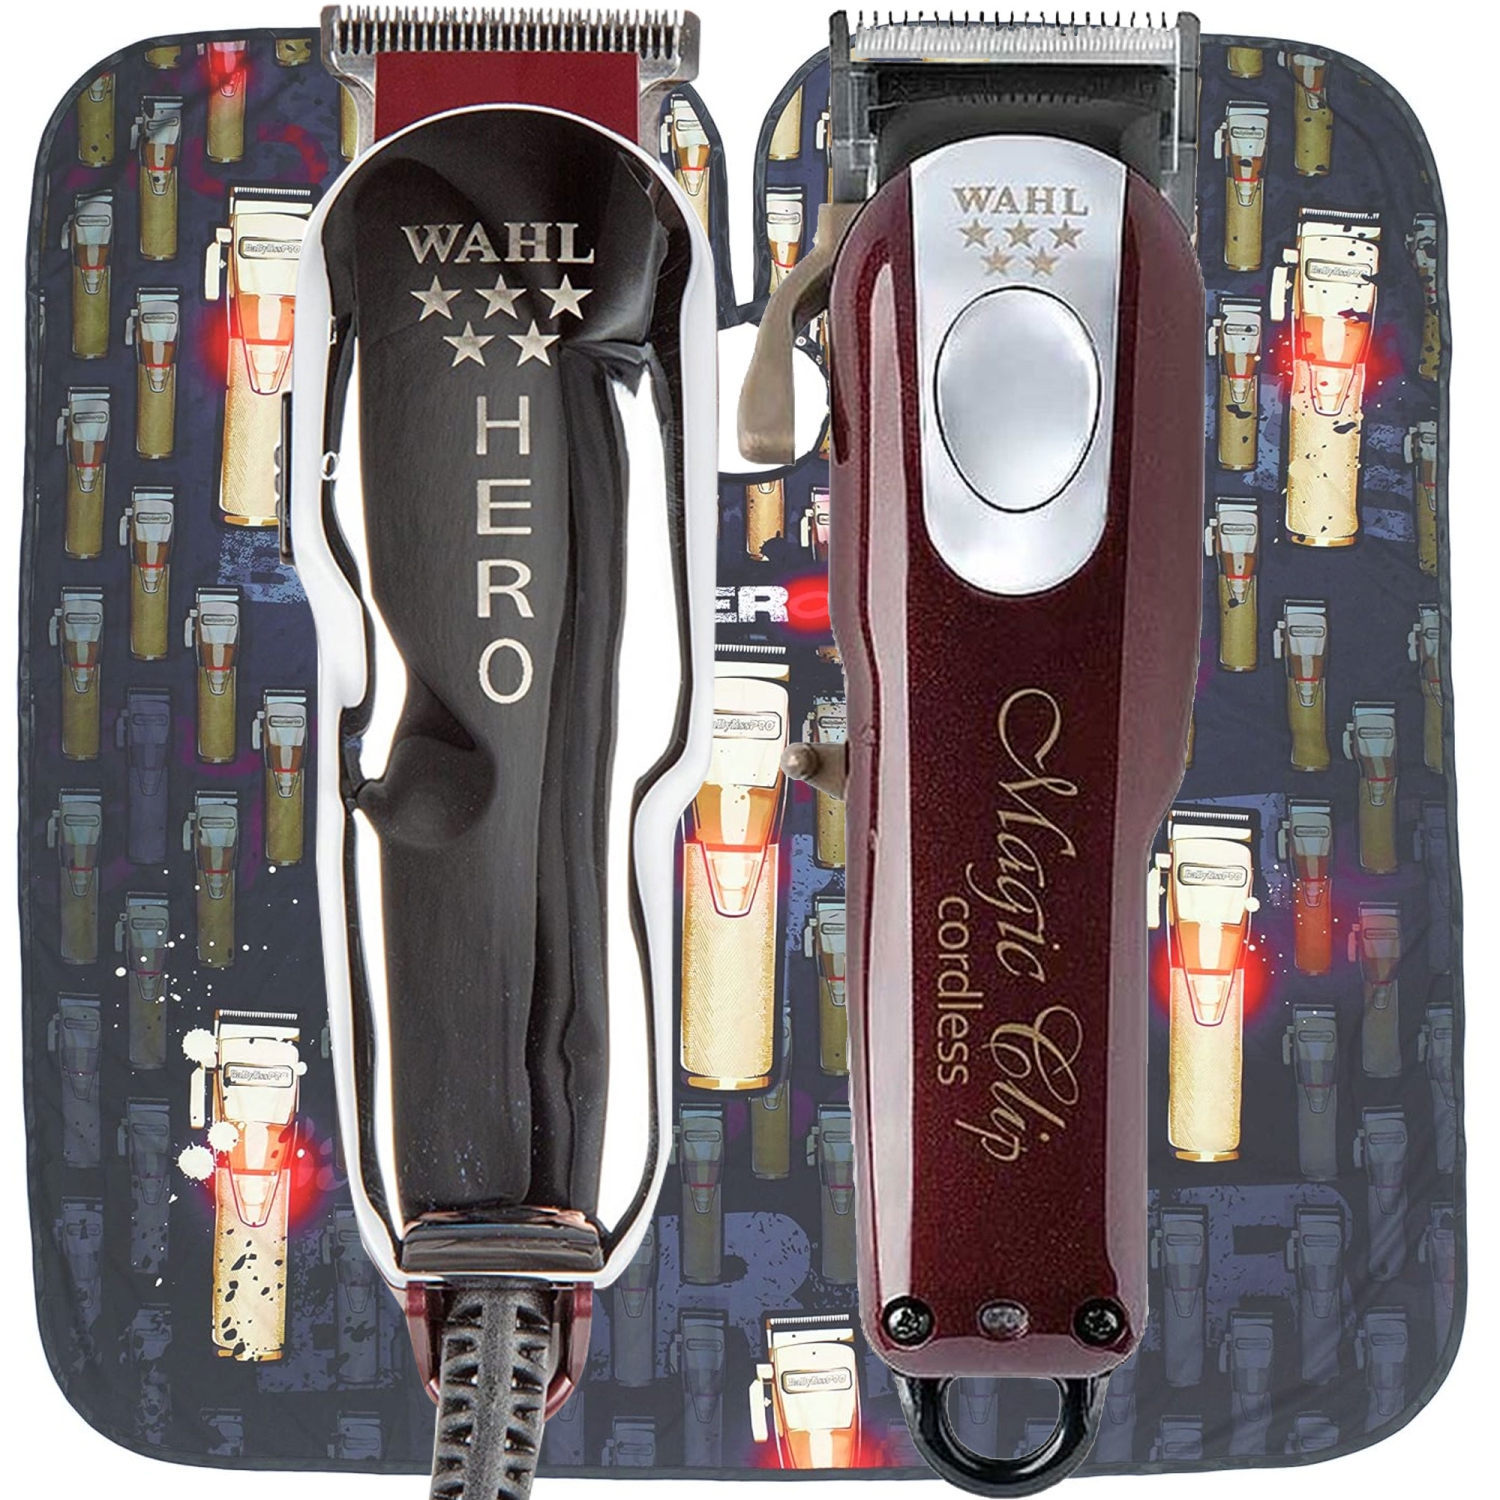 Wahl Professional 5-Star Magic Clipper 8148 + Hero Corded T Blade Trimmer & Cape